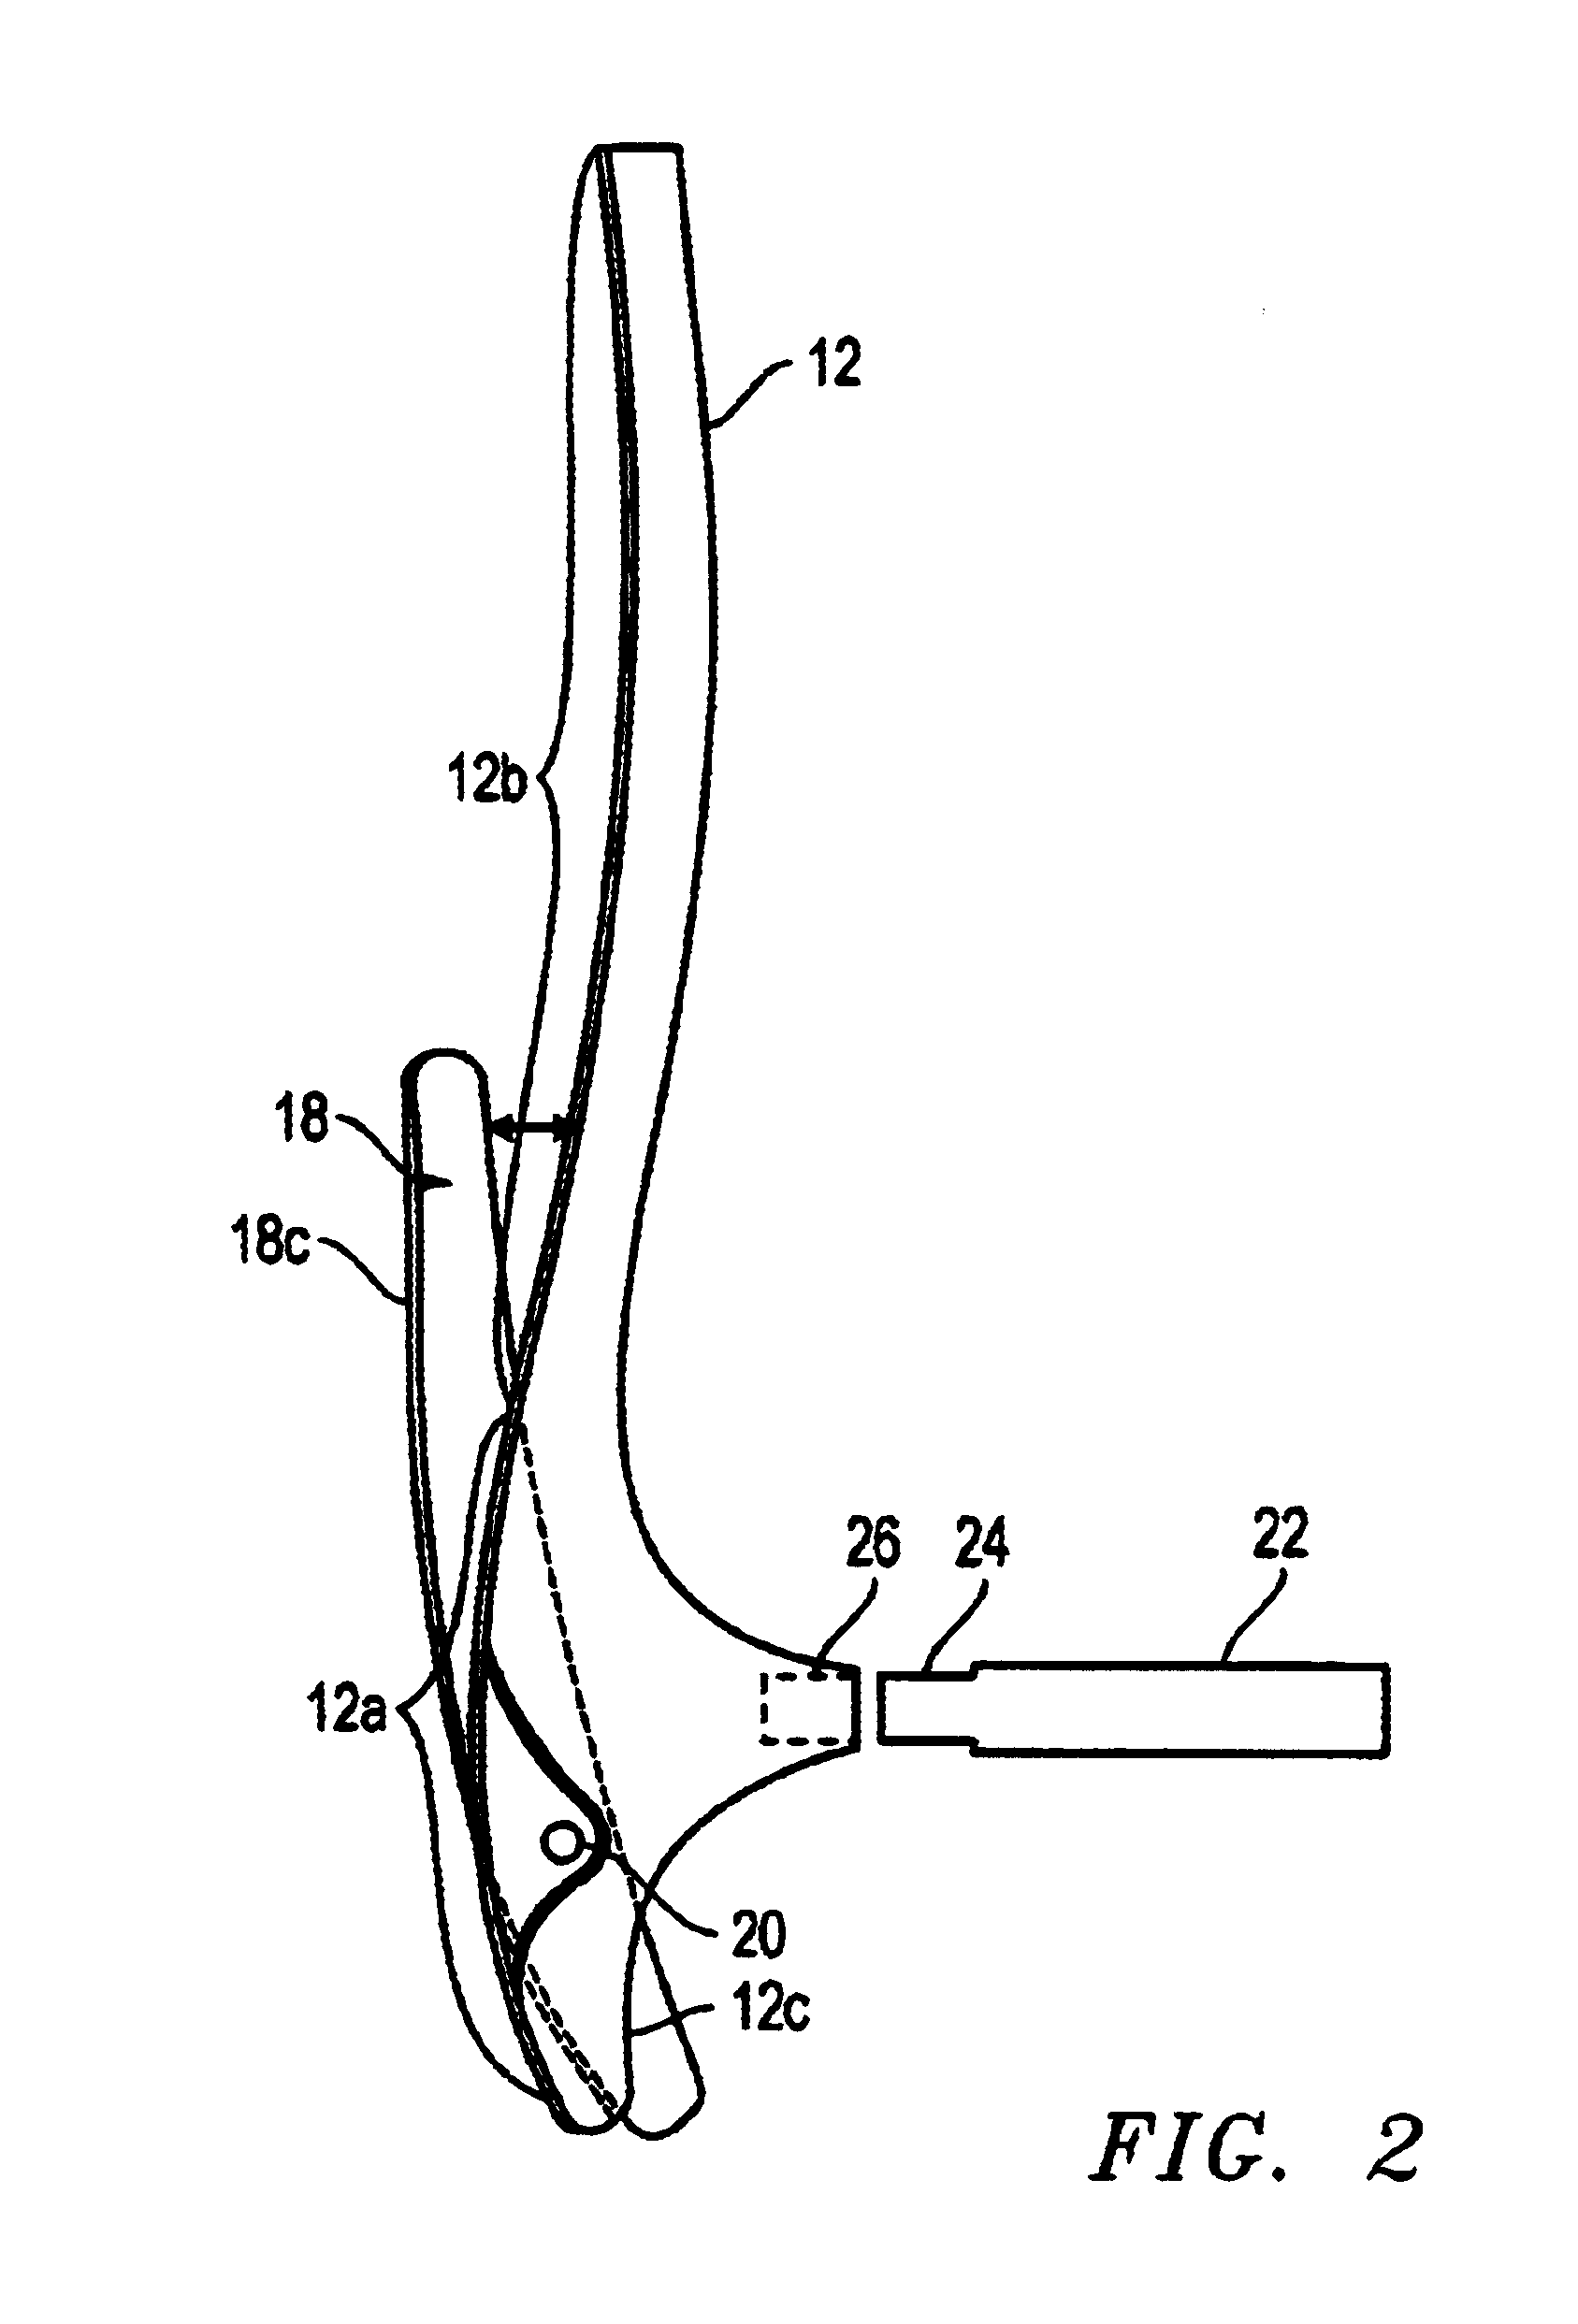 Back-supported load-carrying mechanism with suspension-mounted pivoting lumbar support